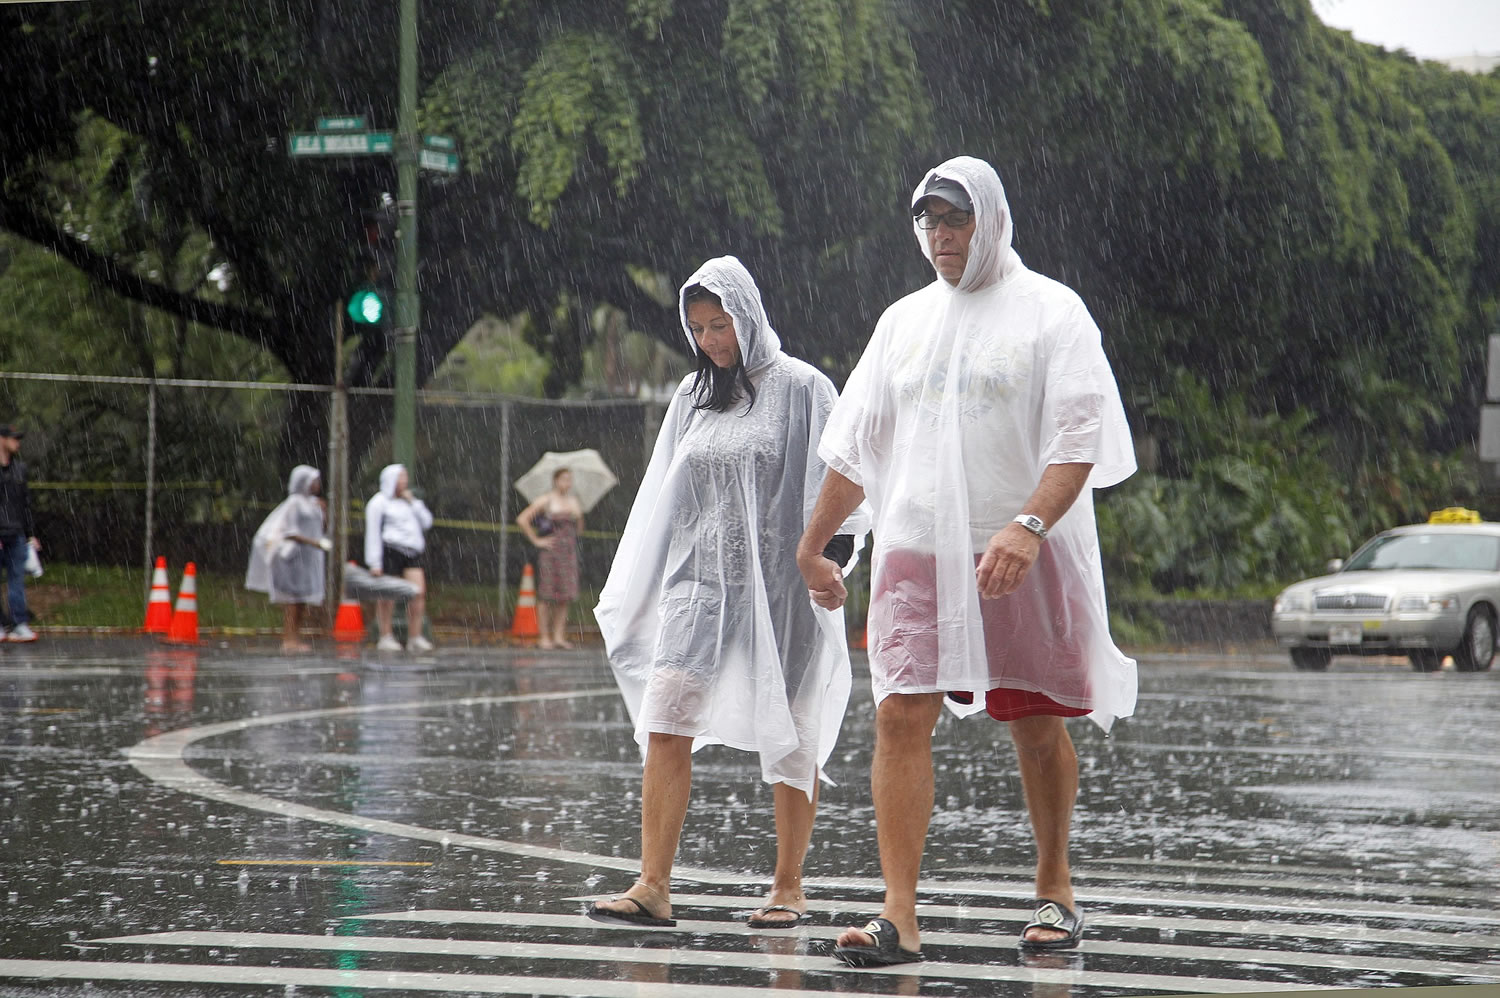 Tourists cope wet weather in Waikiki in Honolulu on Sunday. Hurricane Ana brought a steady rain to the Hawaiian Island of Oahu as it passed about 180 miles west.